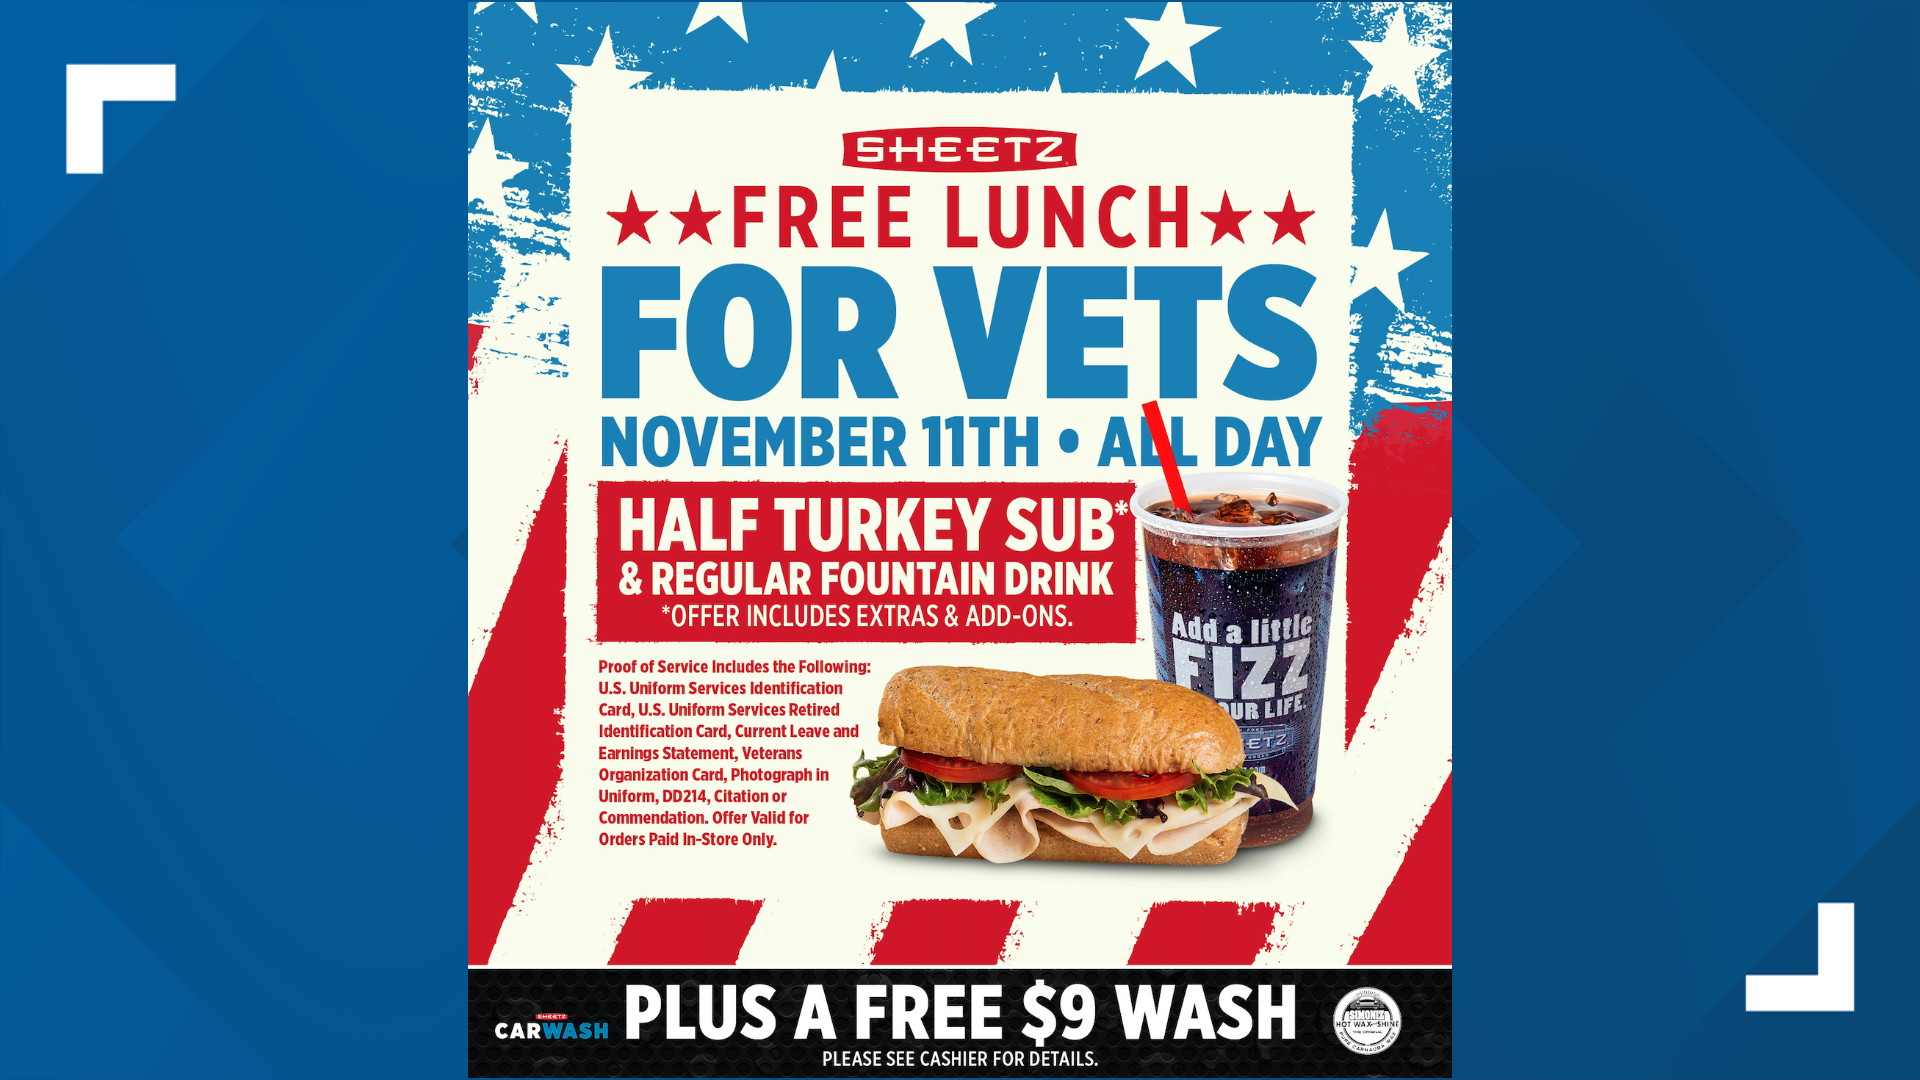 sheetz-offers-free-meal-and-car-wash-to-all-veterans-and-active-military-members-on-veteran-s